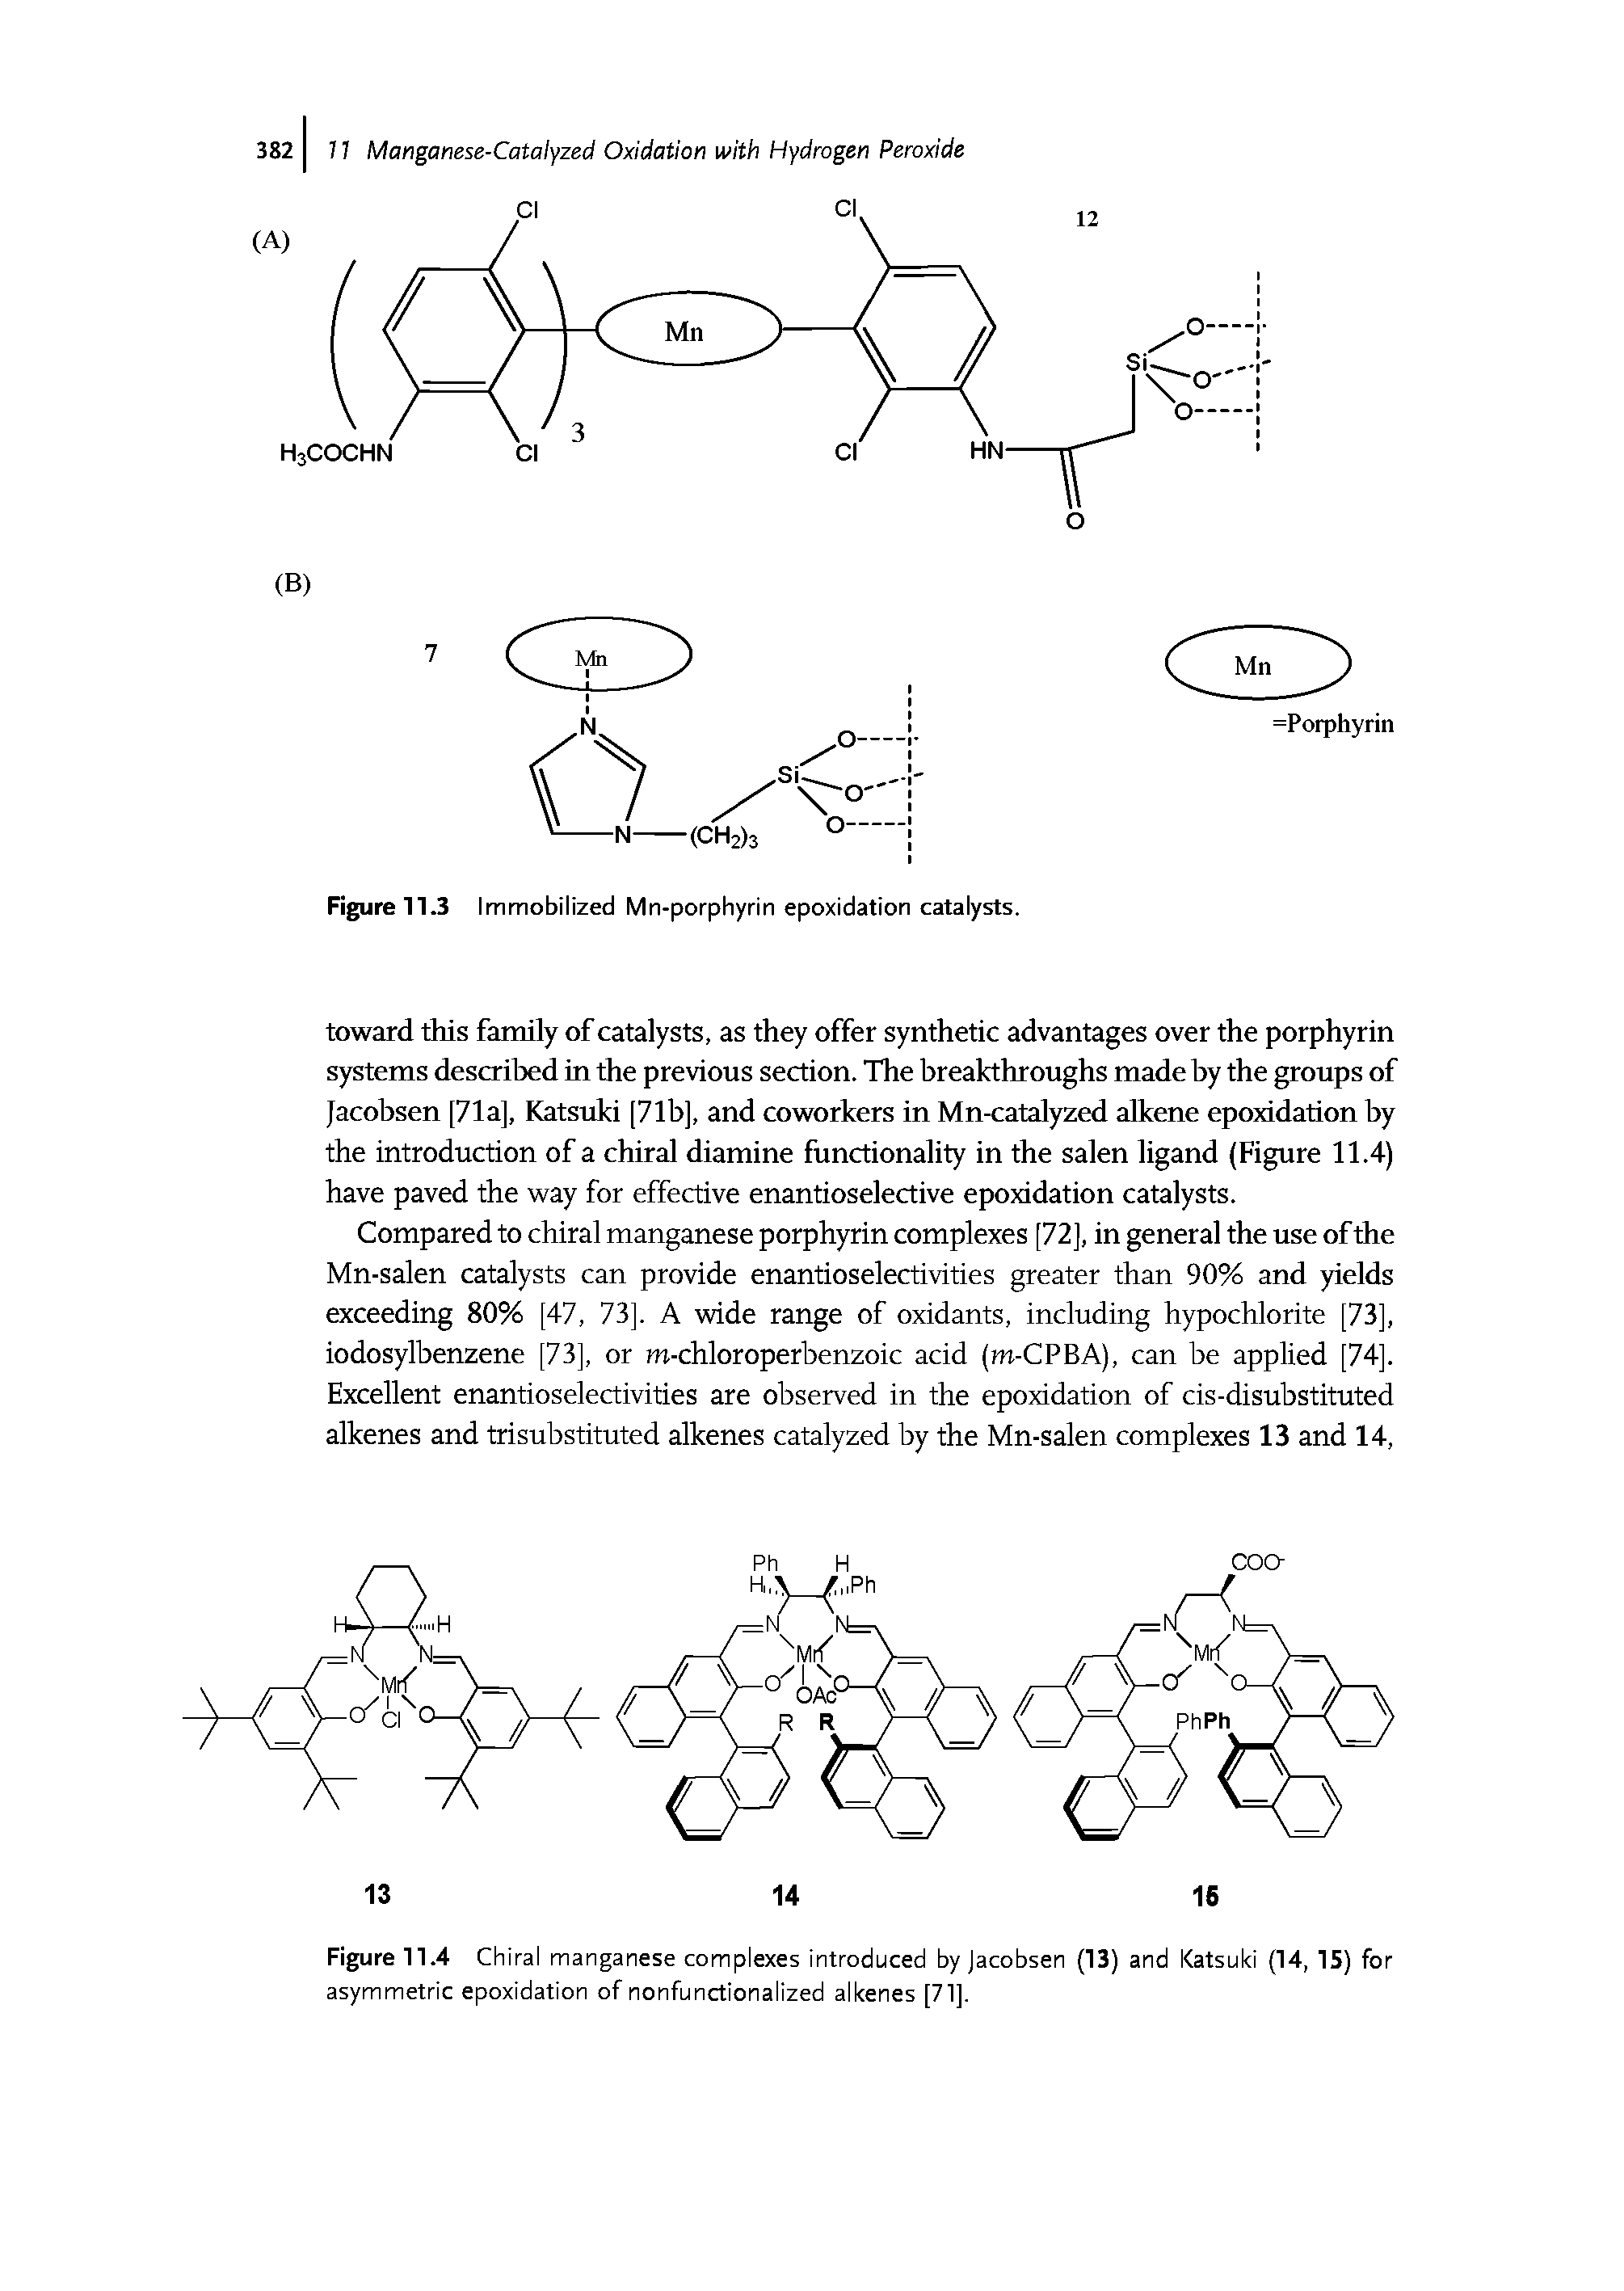 Figure 11.4 Chiral manganese complexes introduced by Jacobsen (13) and Katsuki (14, IS) for asymmetric epoxidation of nonfunctionalized alkenes [71].